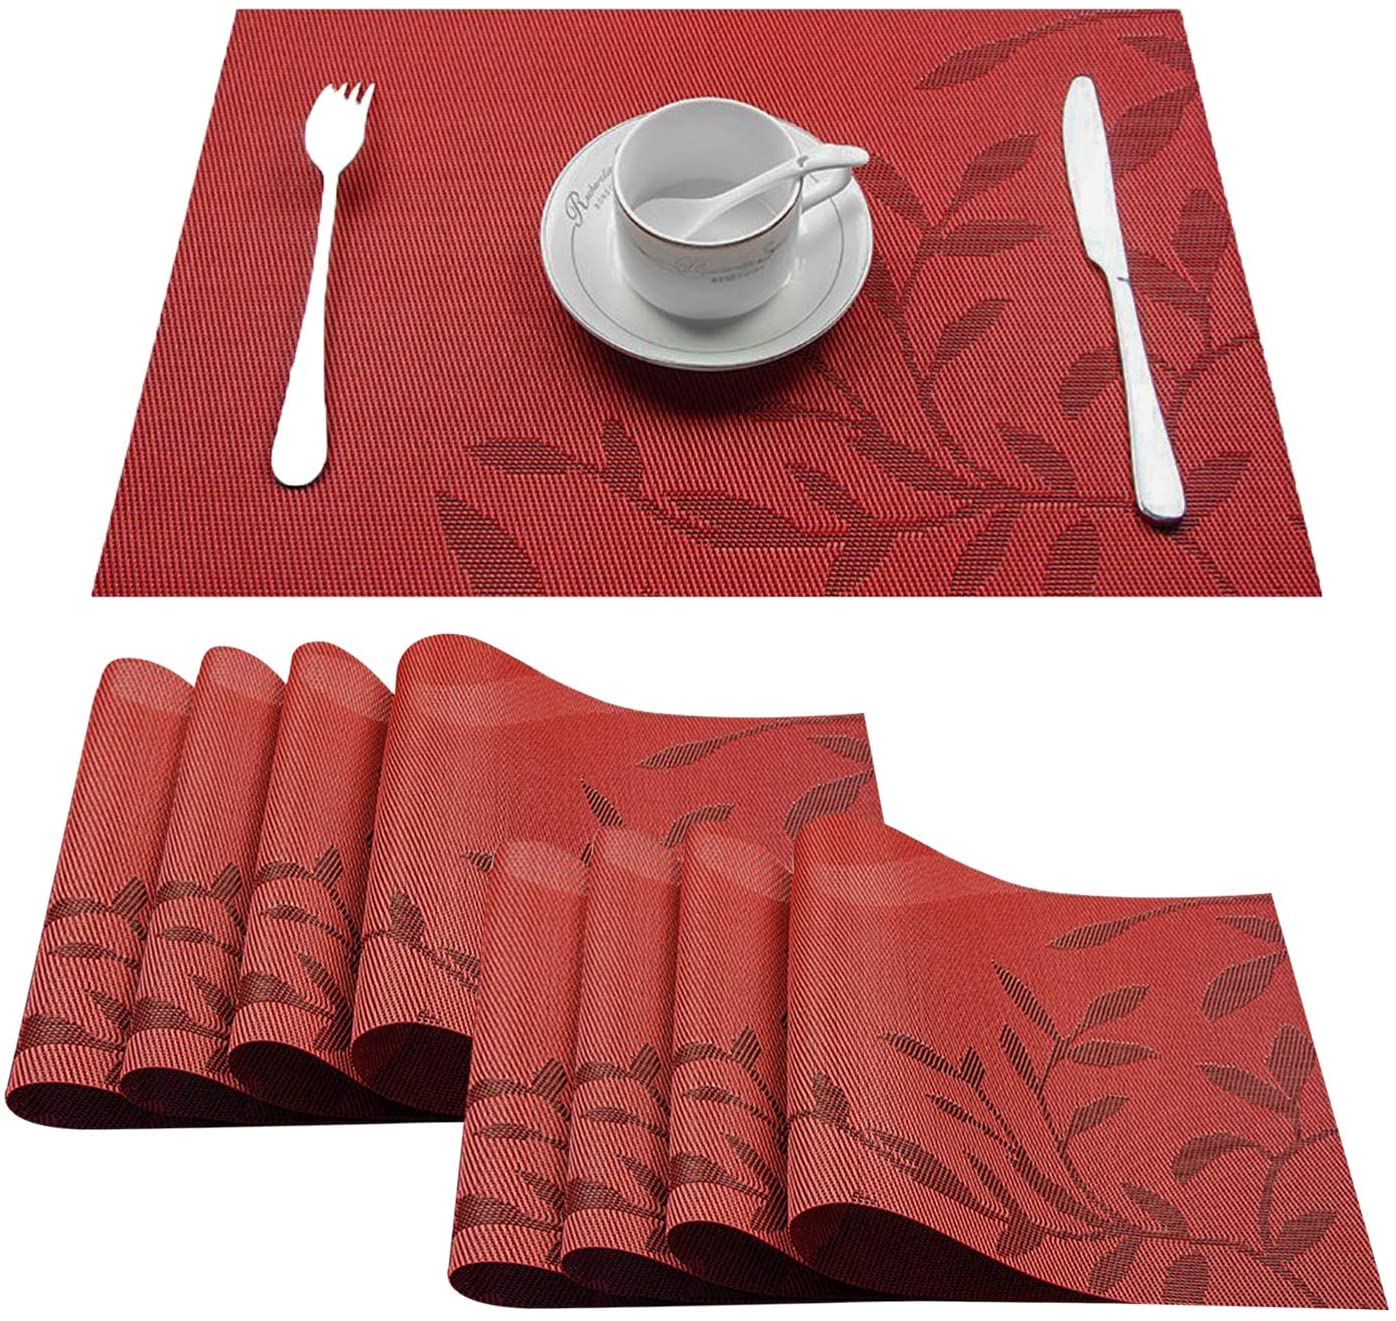 Dinning Table Placemats for Kitchen Table Set of 8 Vinyl Woven Place Mats Heat Resistant Wipeable Placemat for Holiday